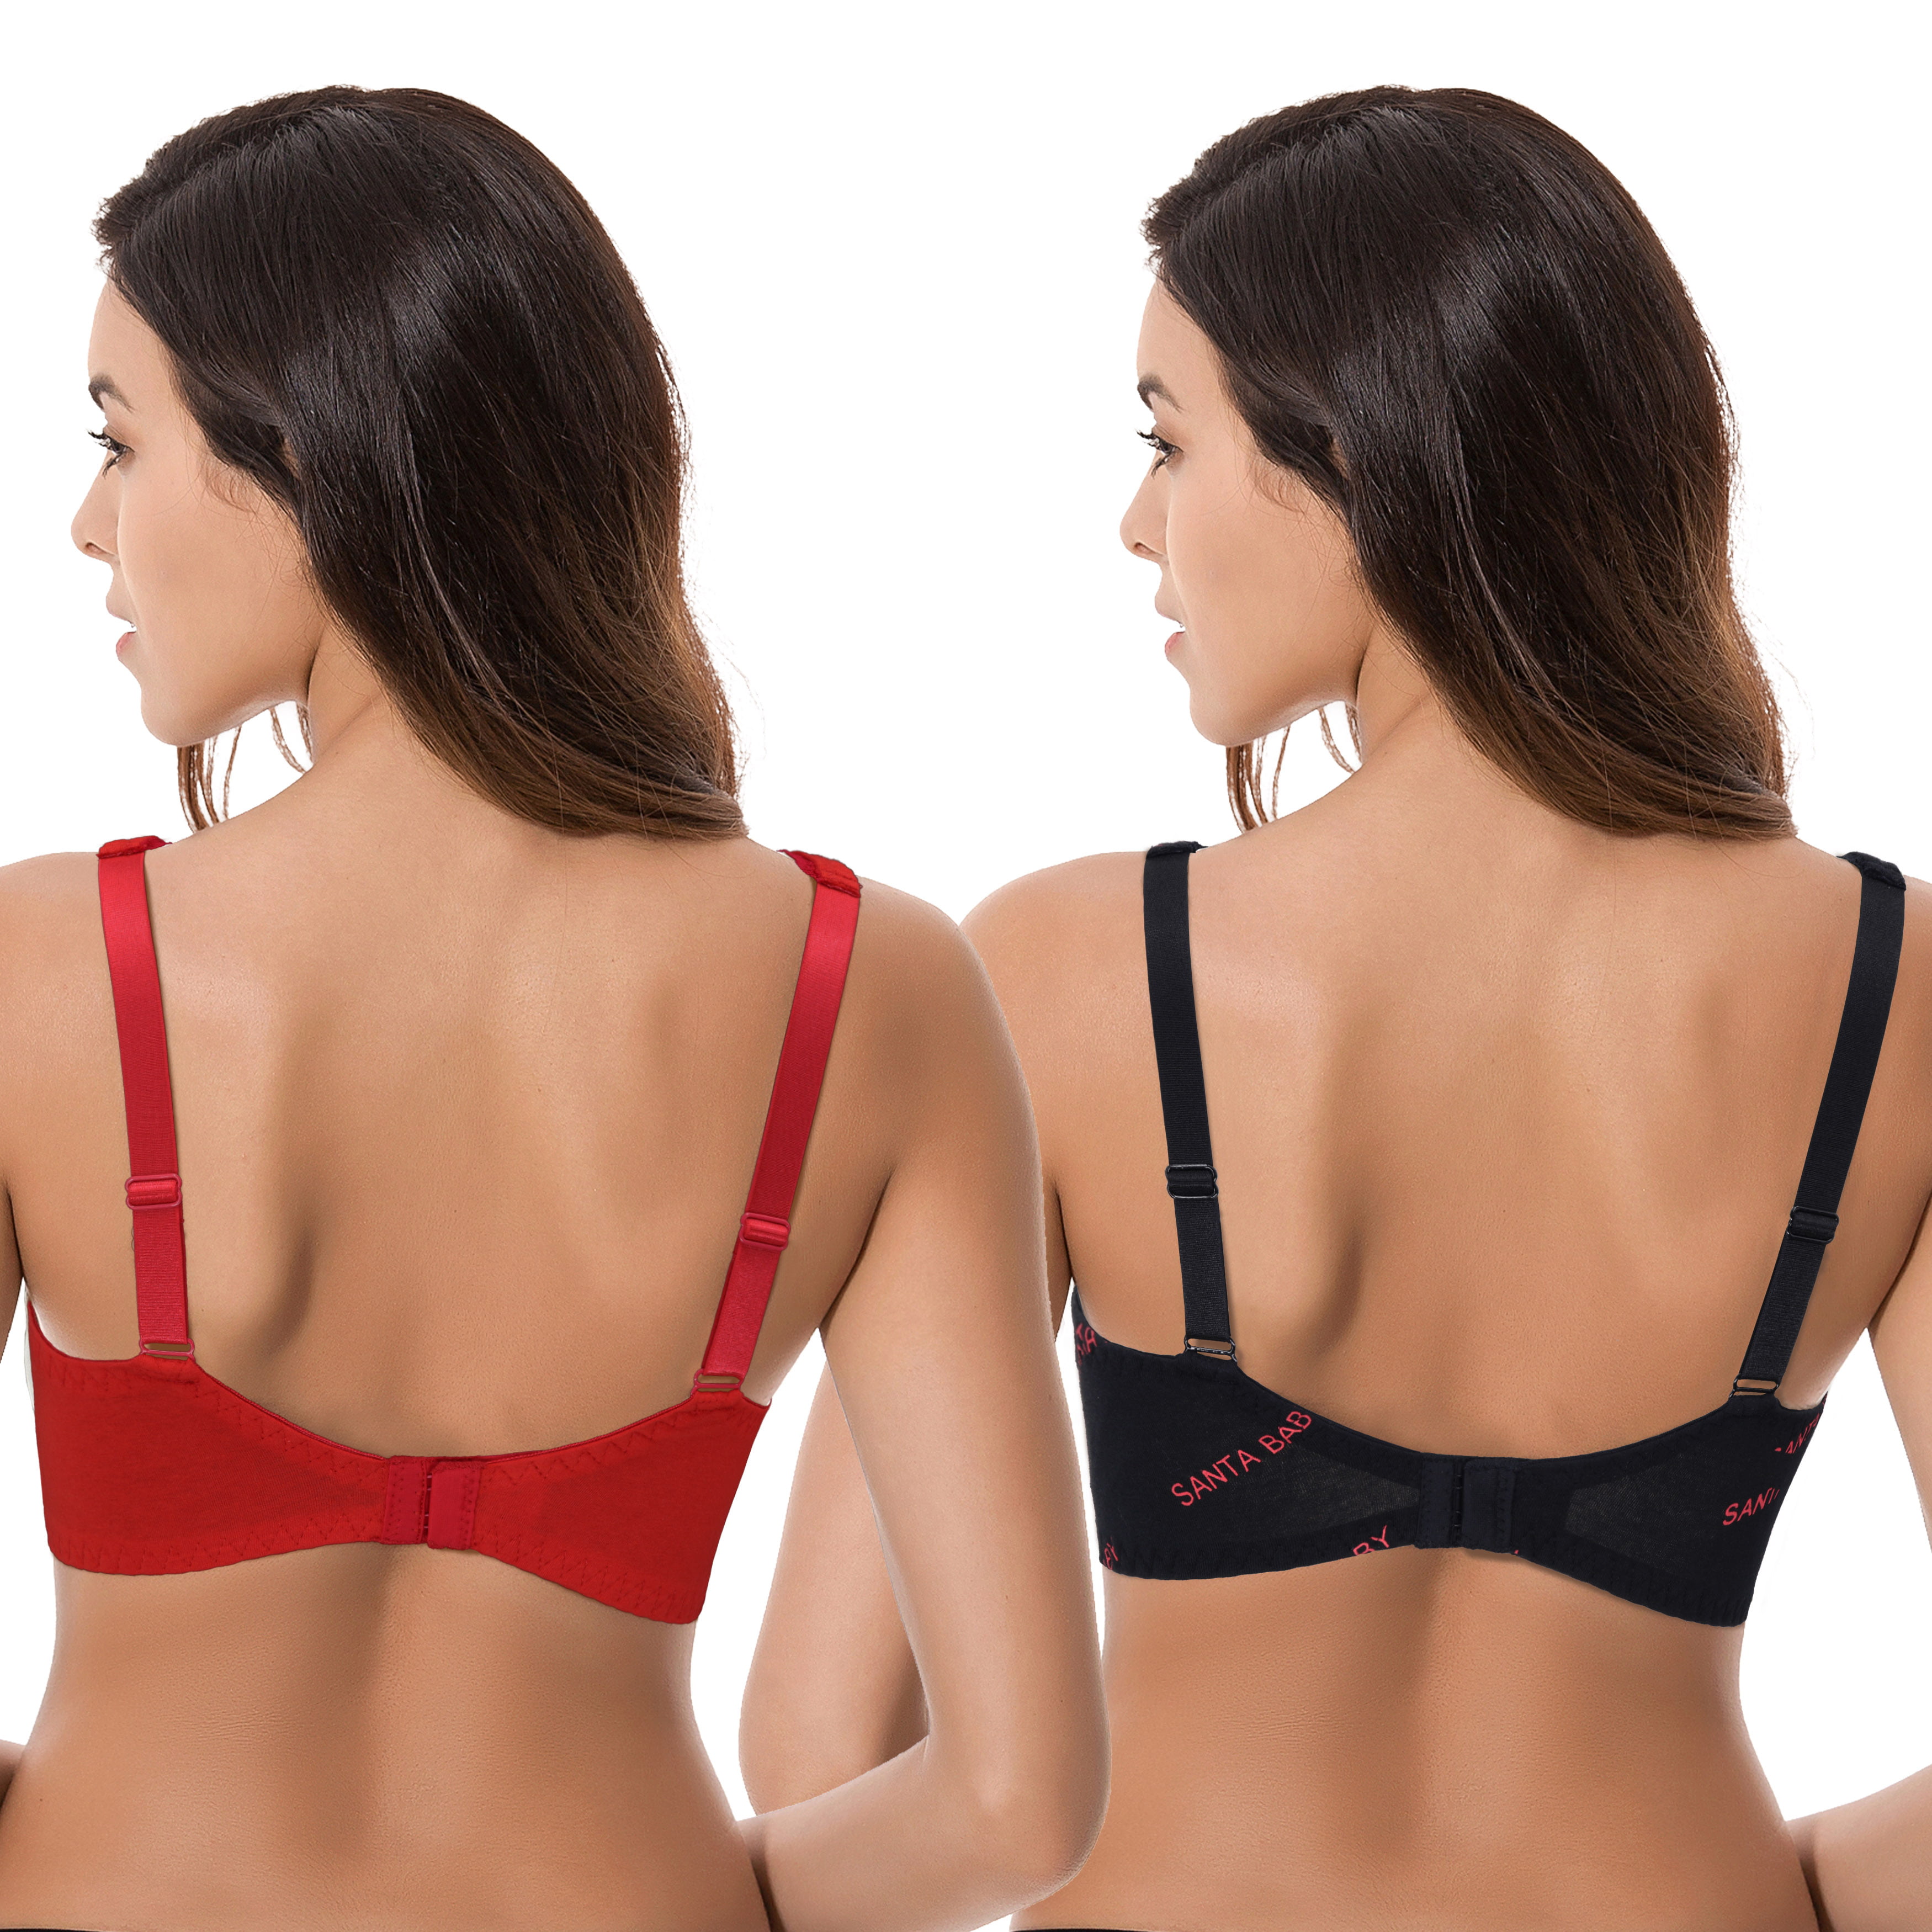 Curve Muse Women's Unlined Plus Size Comfort Cotton Underwire Bra -Black/Red,Red-48DDD 